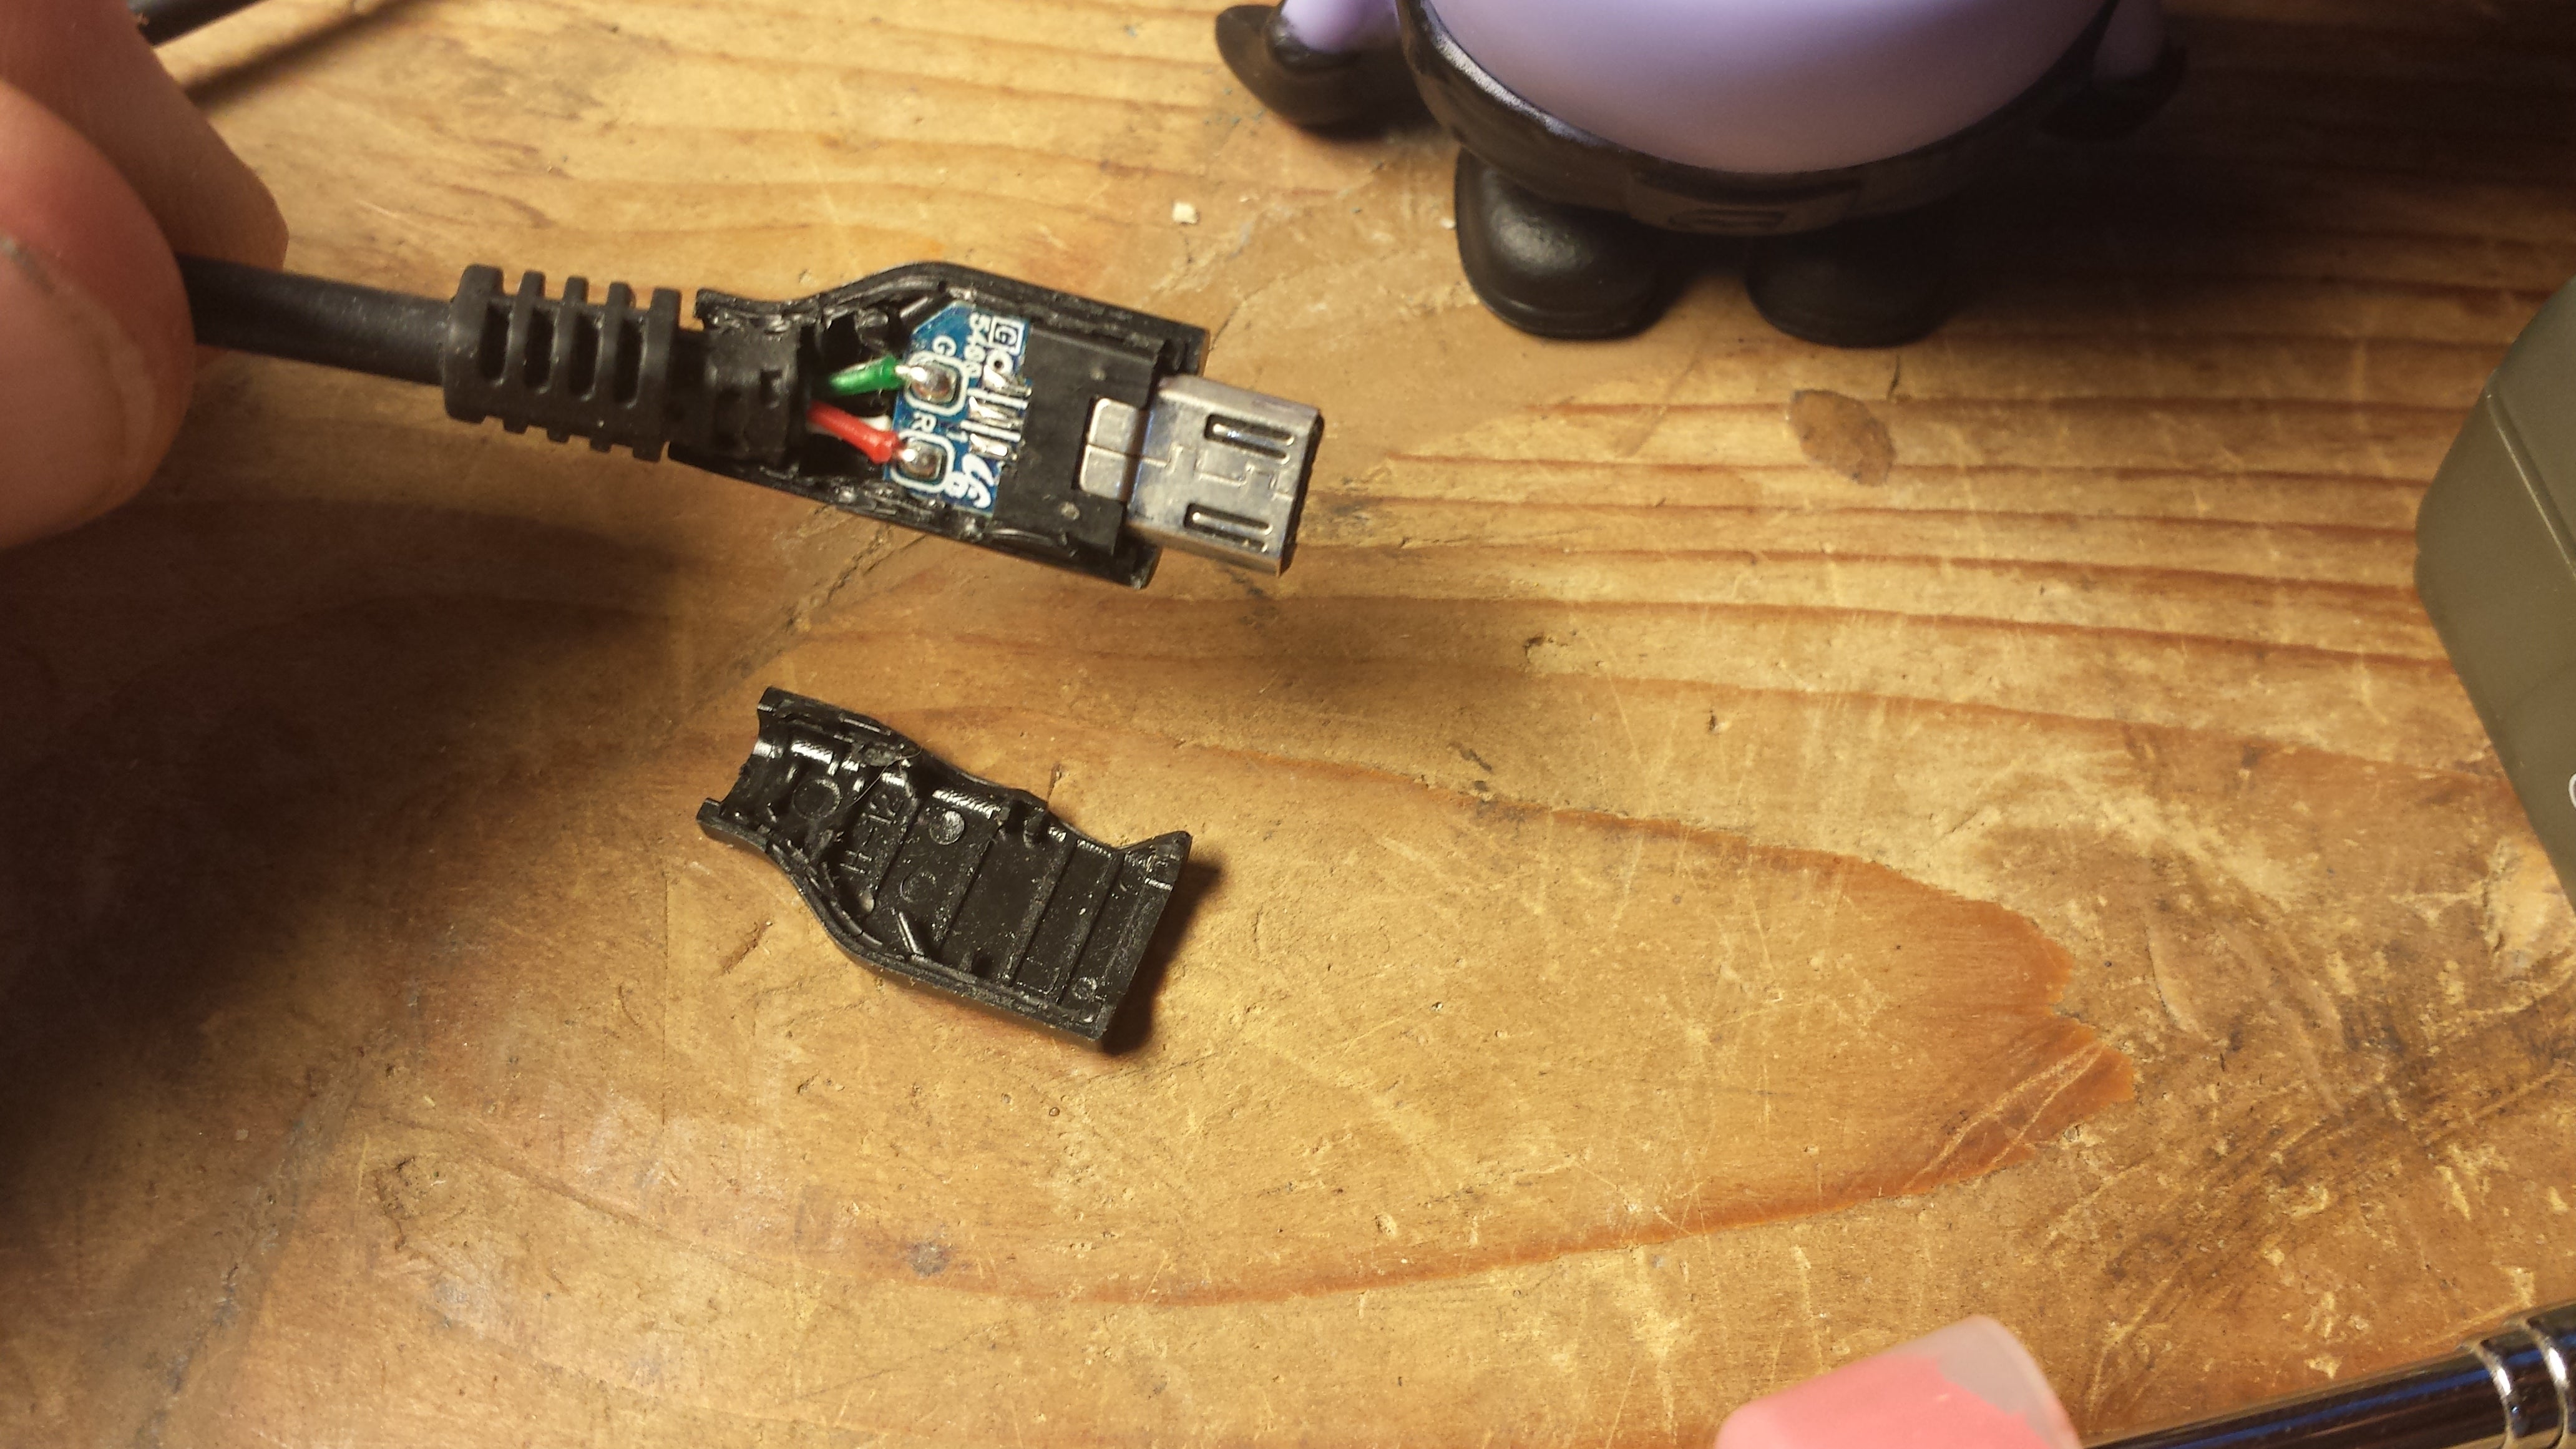 Reattach a USB Charging Cable Housing Cover With Sugru